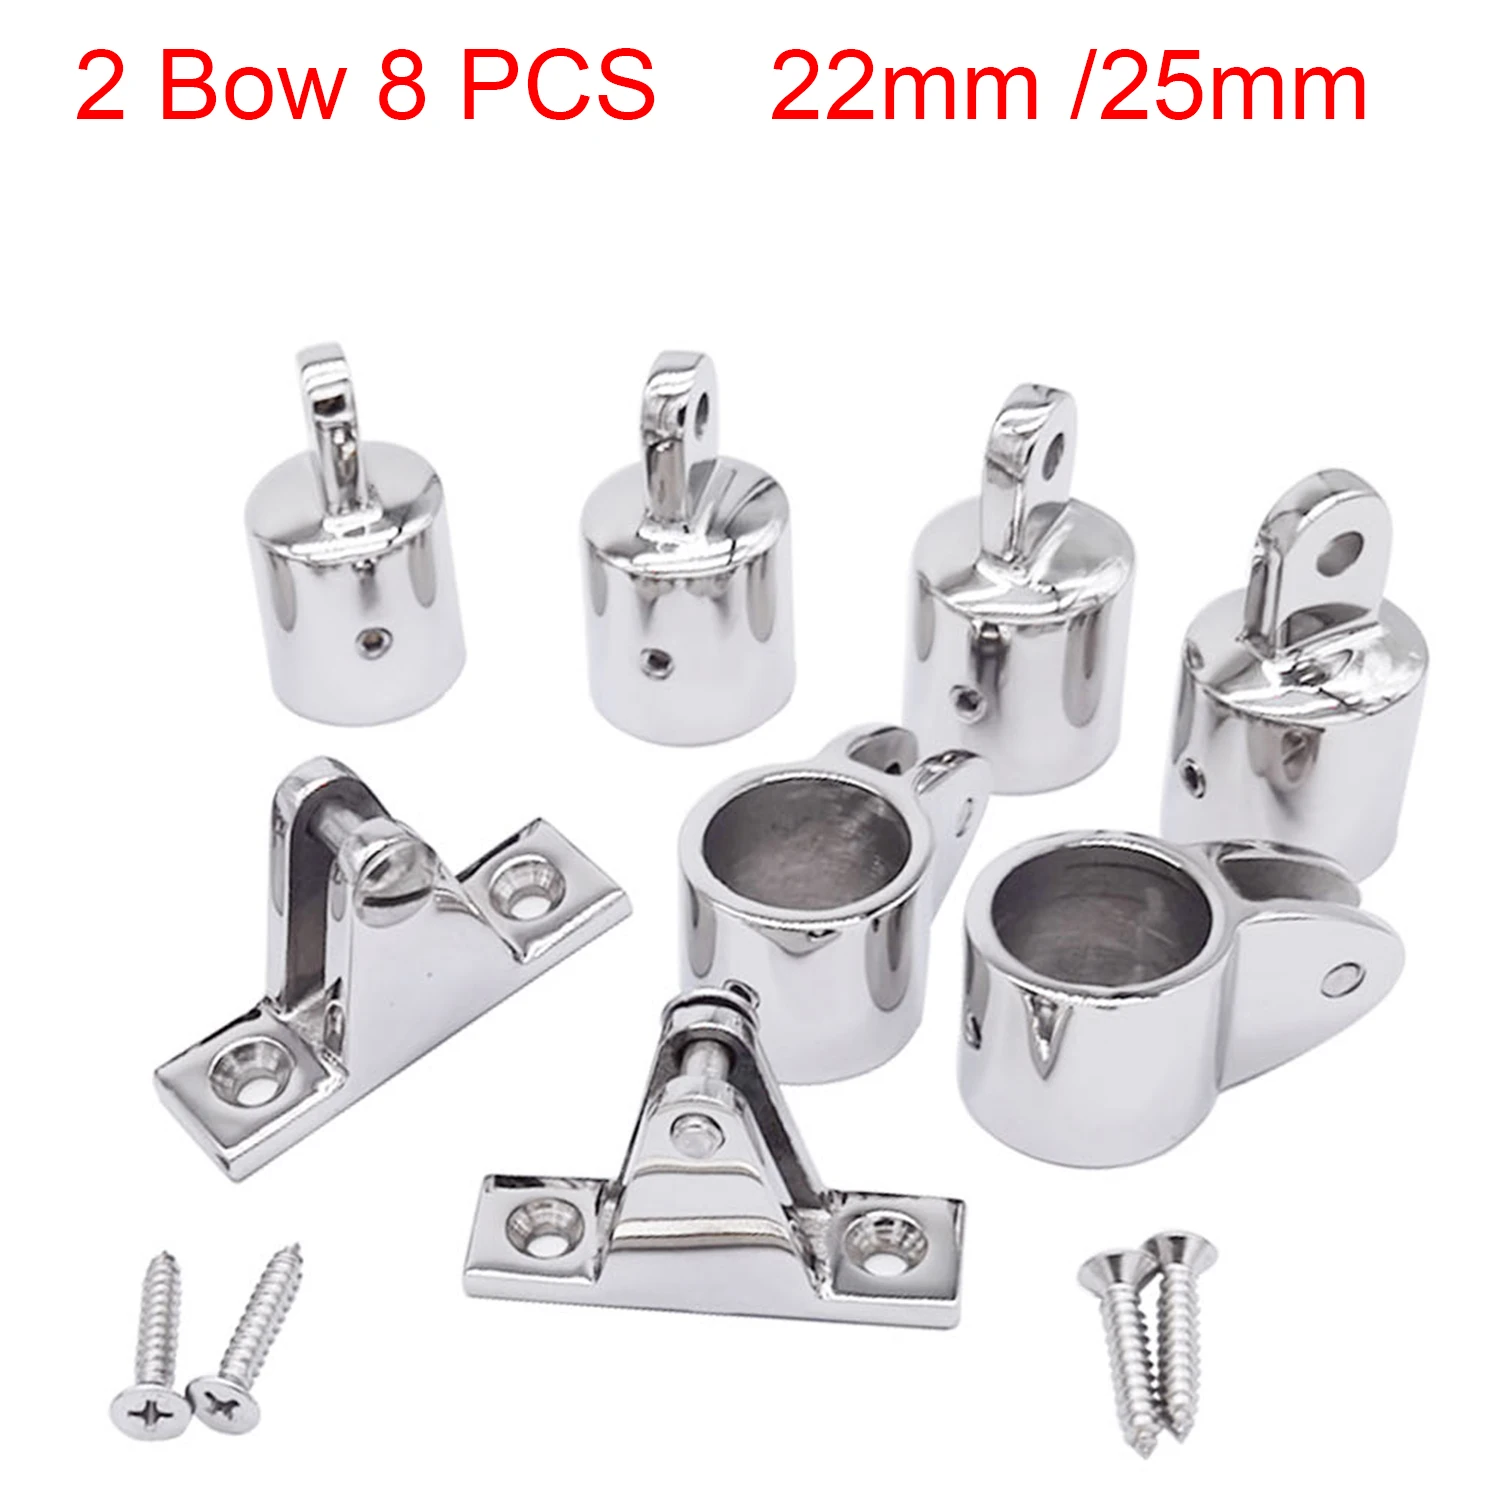 8 PCS Marine 316 Stainless Steel 2-Bow Bimini Top Hardware Fitting Set Deck Hinge Jaw Slide Eye End Fitting for 22/25mm Pipe